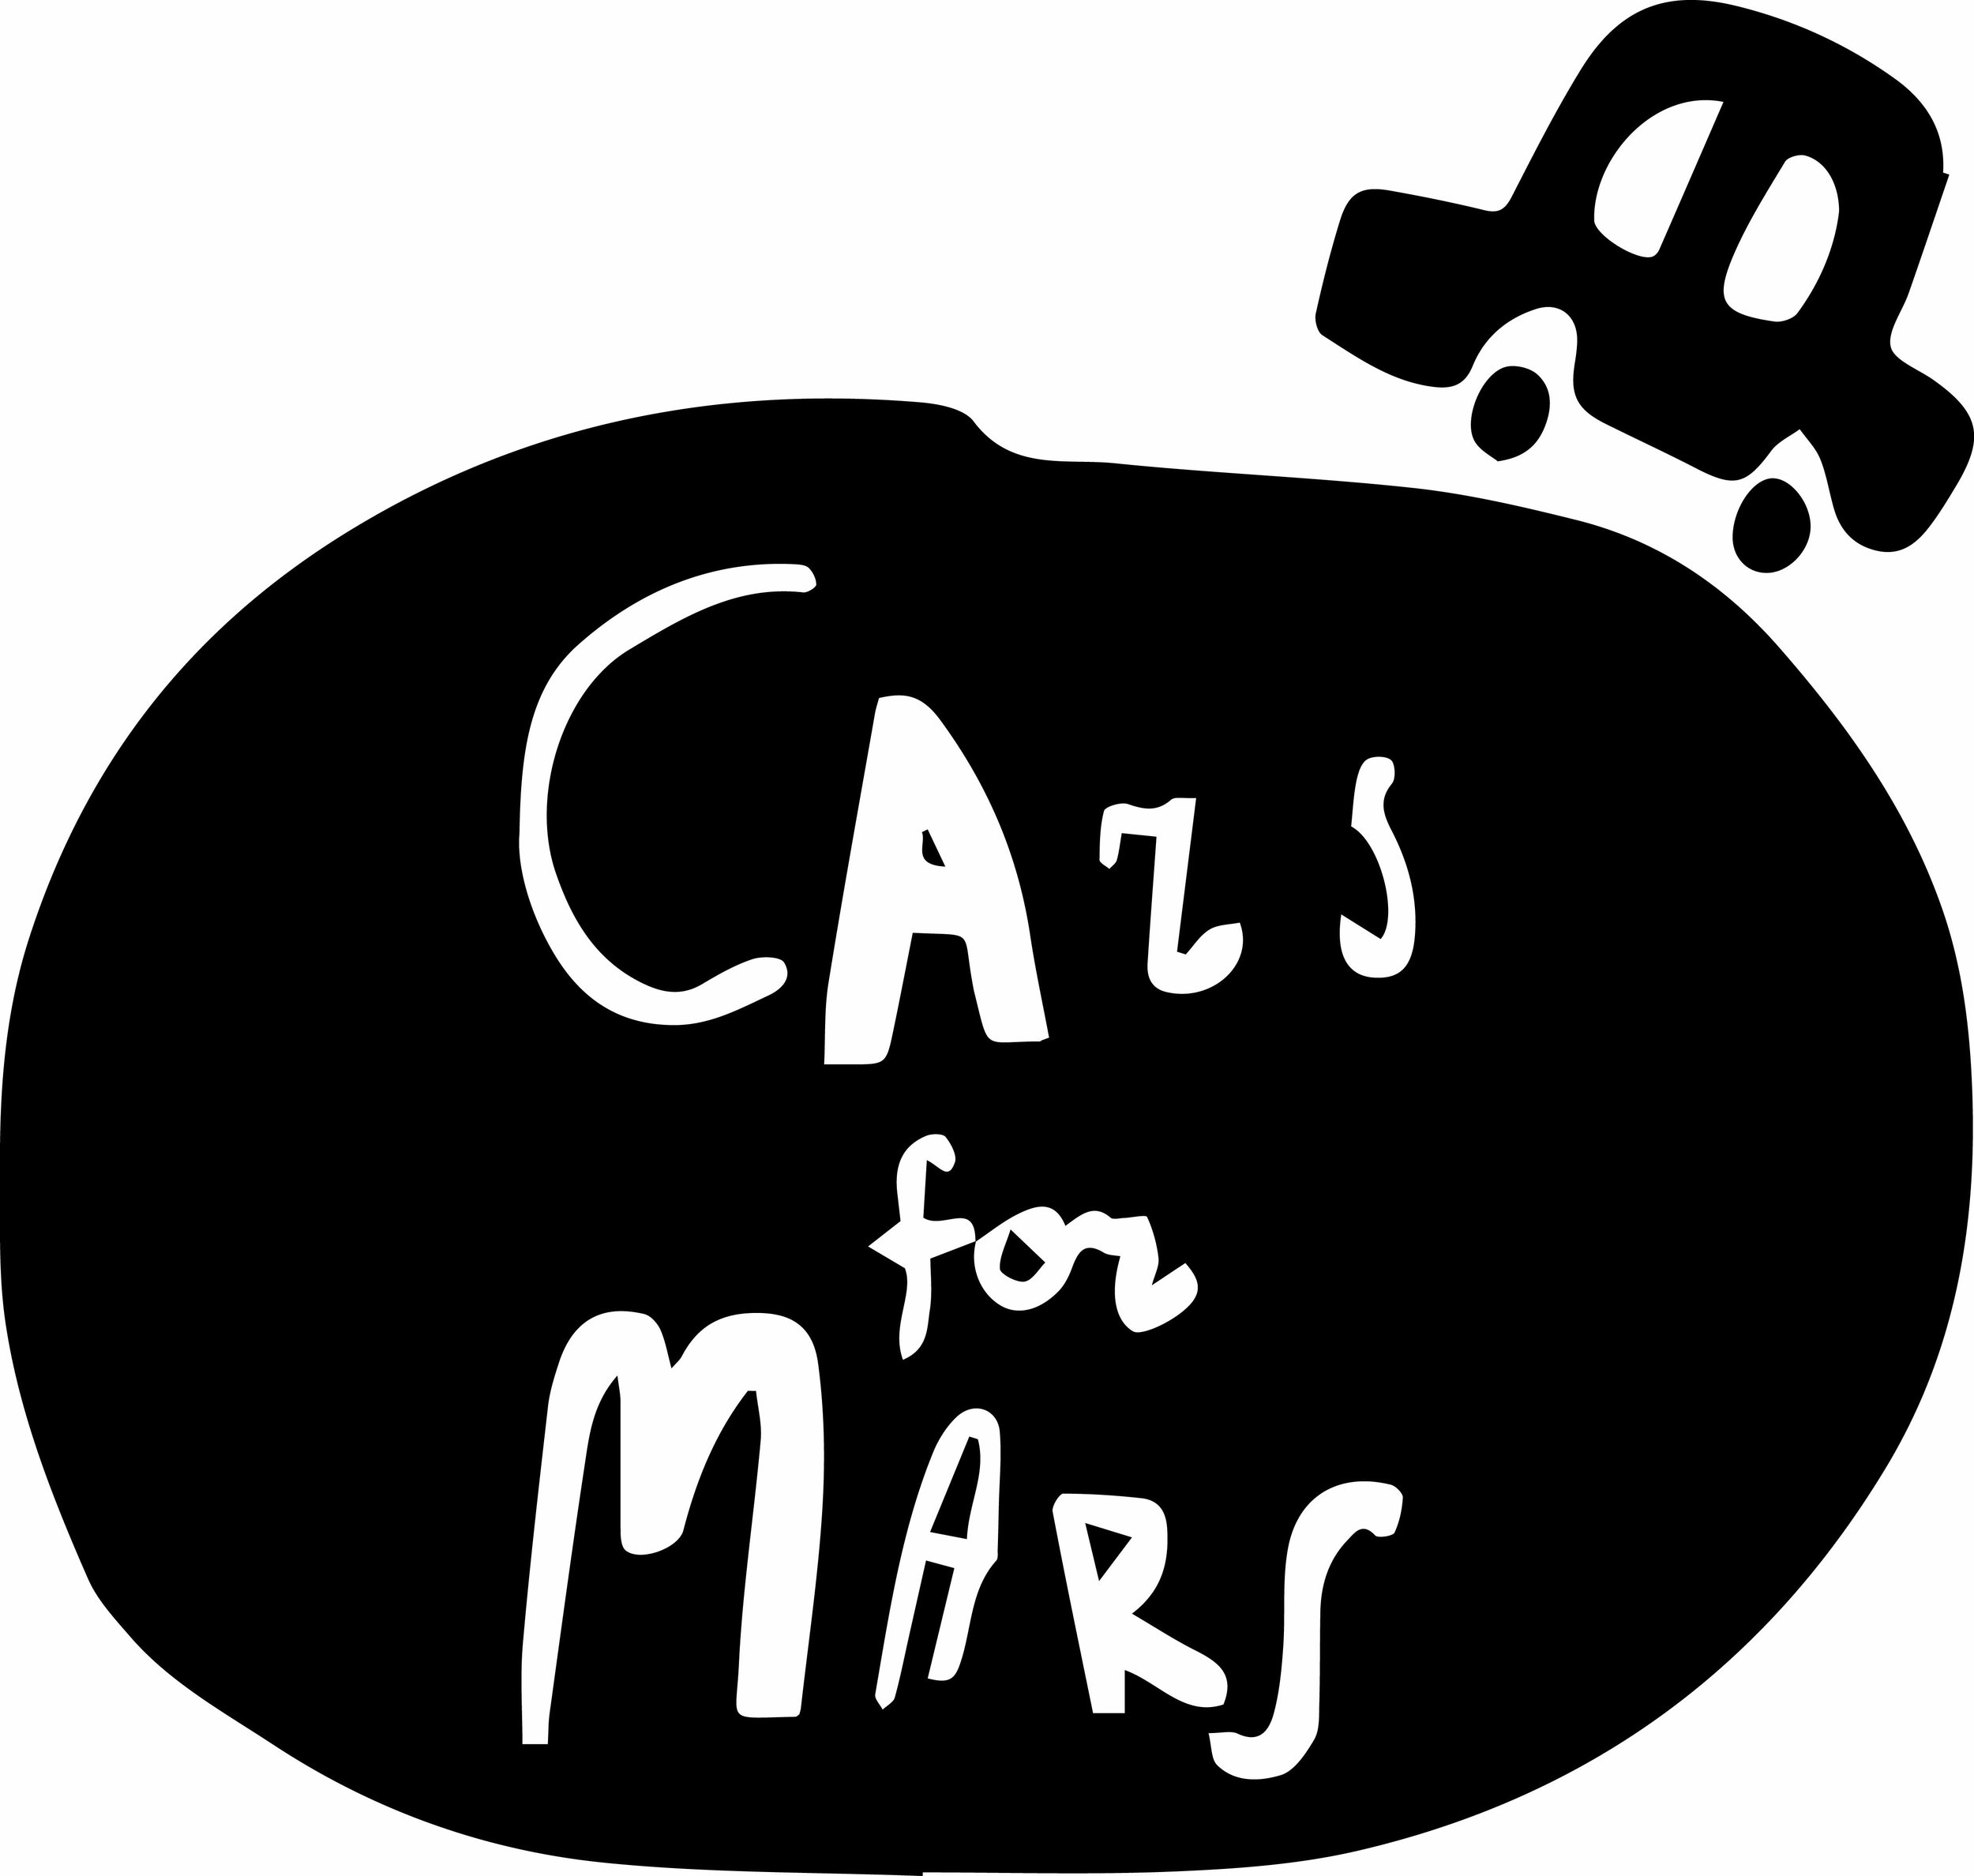 Cars For Mars